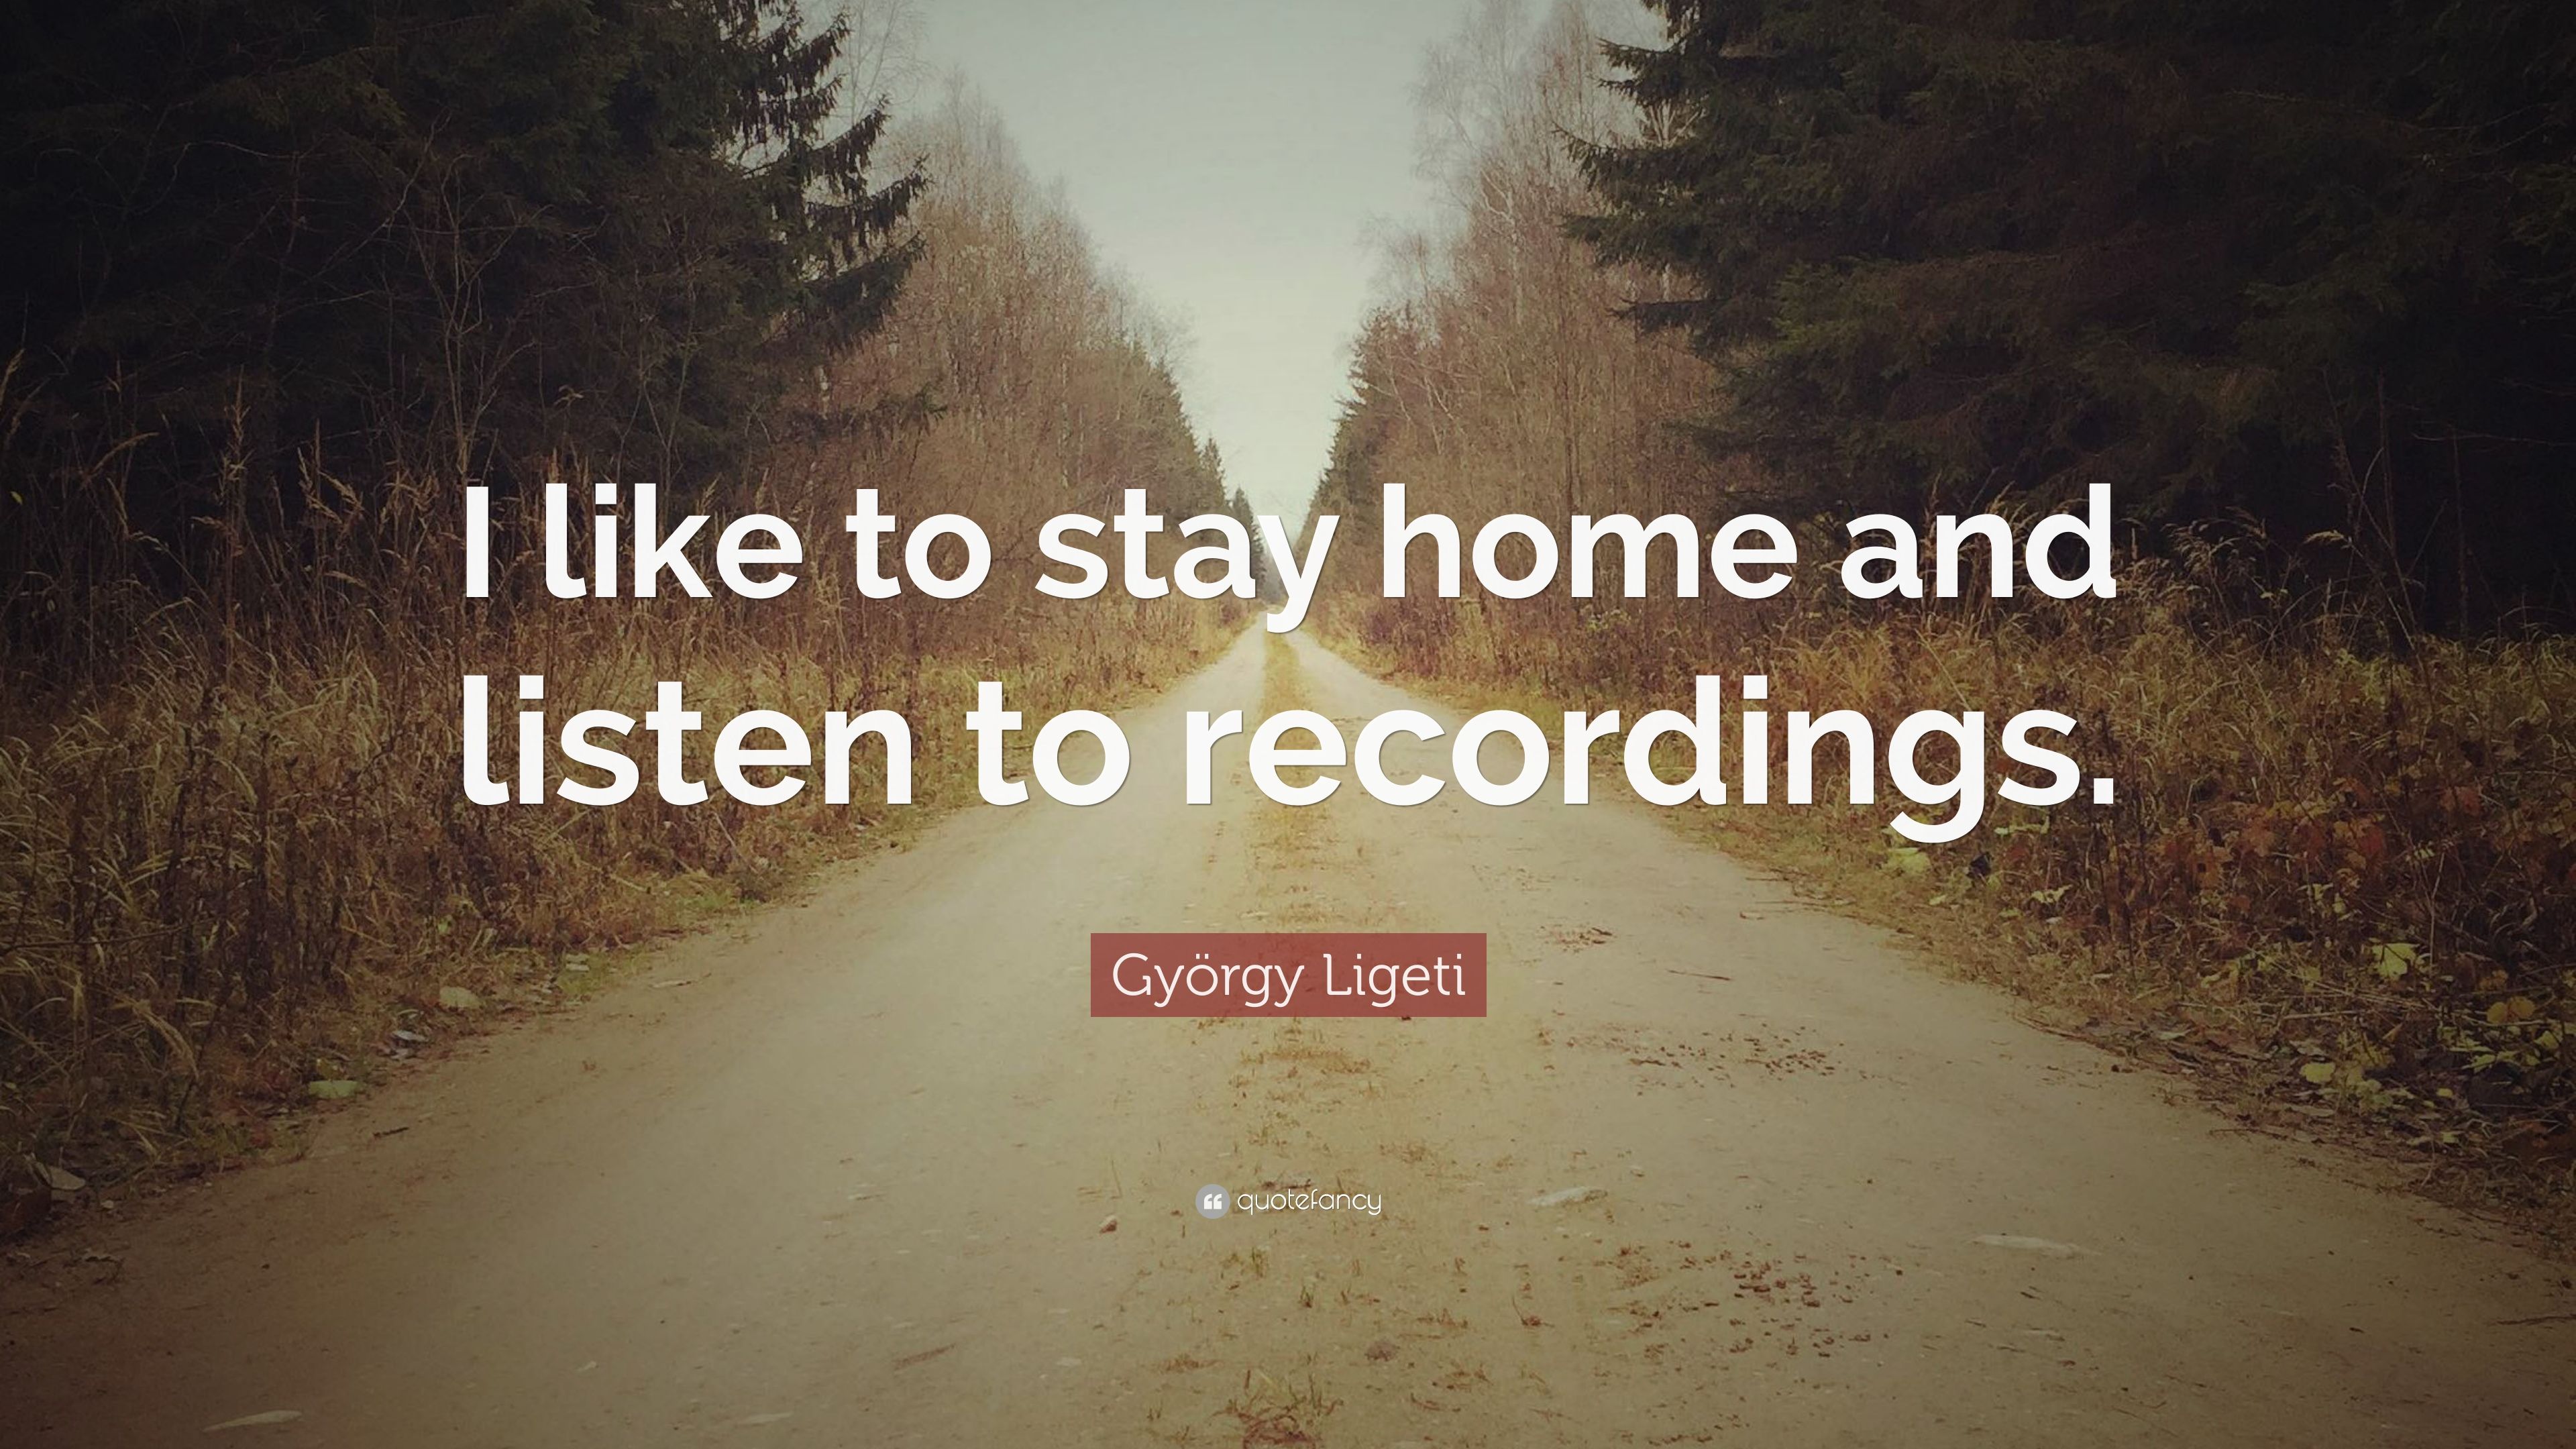 György Ligeti Quote: “I like to stay home and listen to recordings